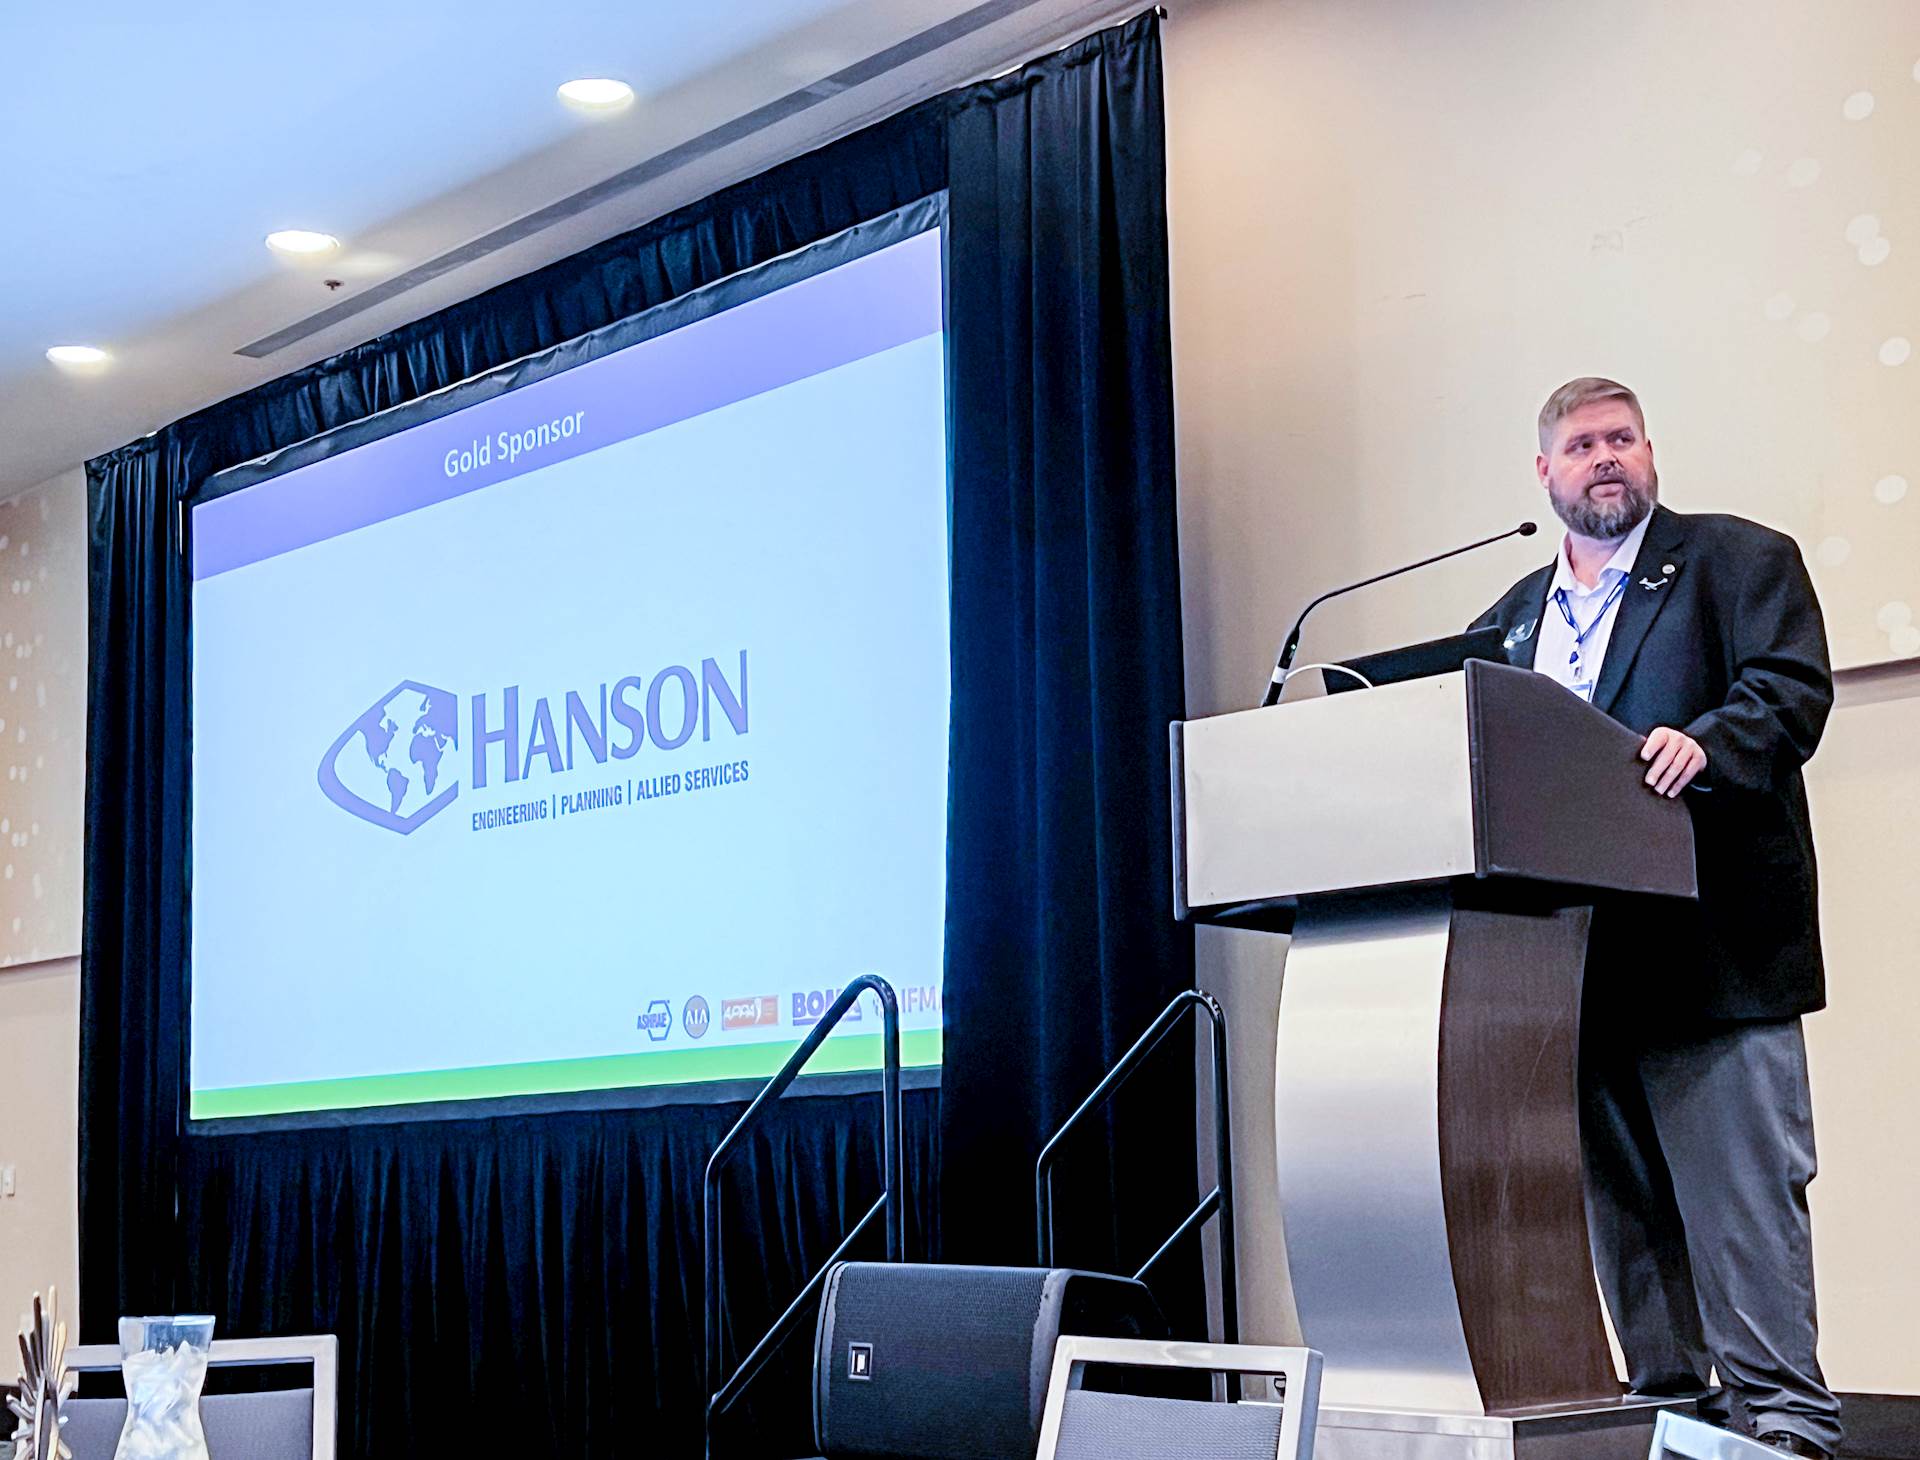 Person stands behind a lectern next to a project screen in a meeting room; screen shows Hanson logo on presentation slide for conference sponsors.